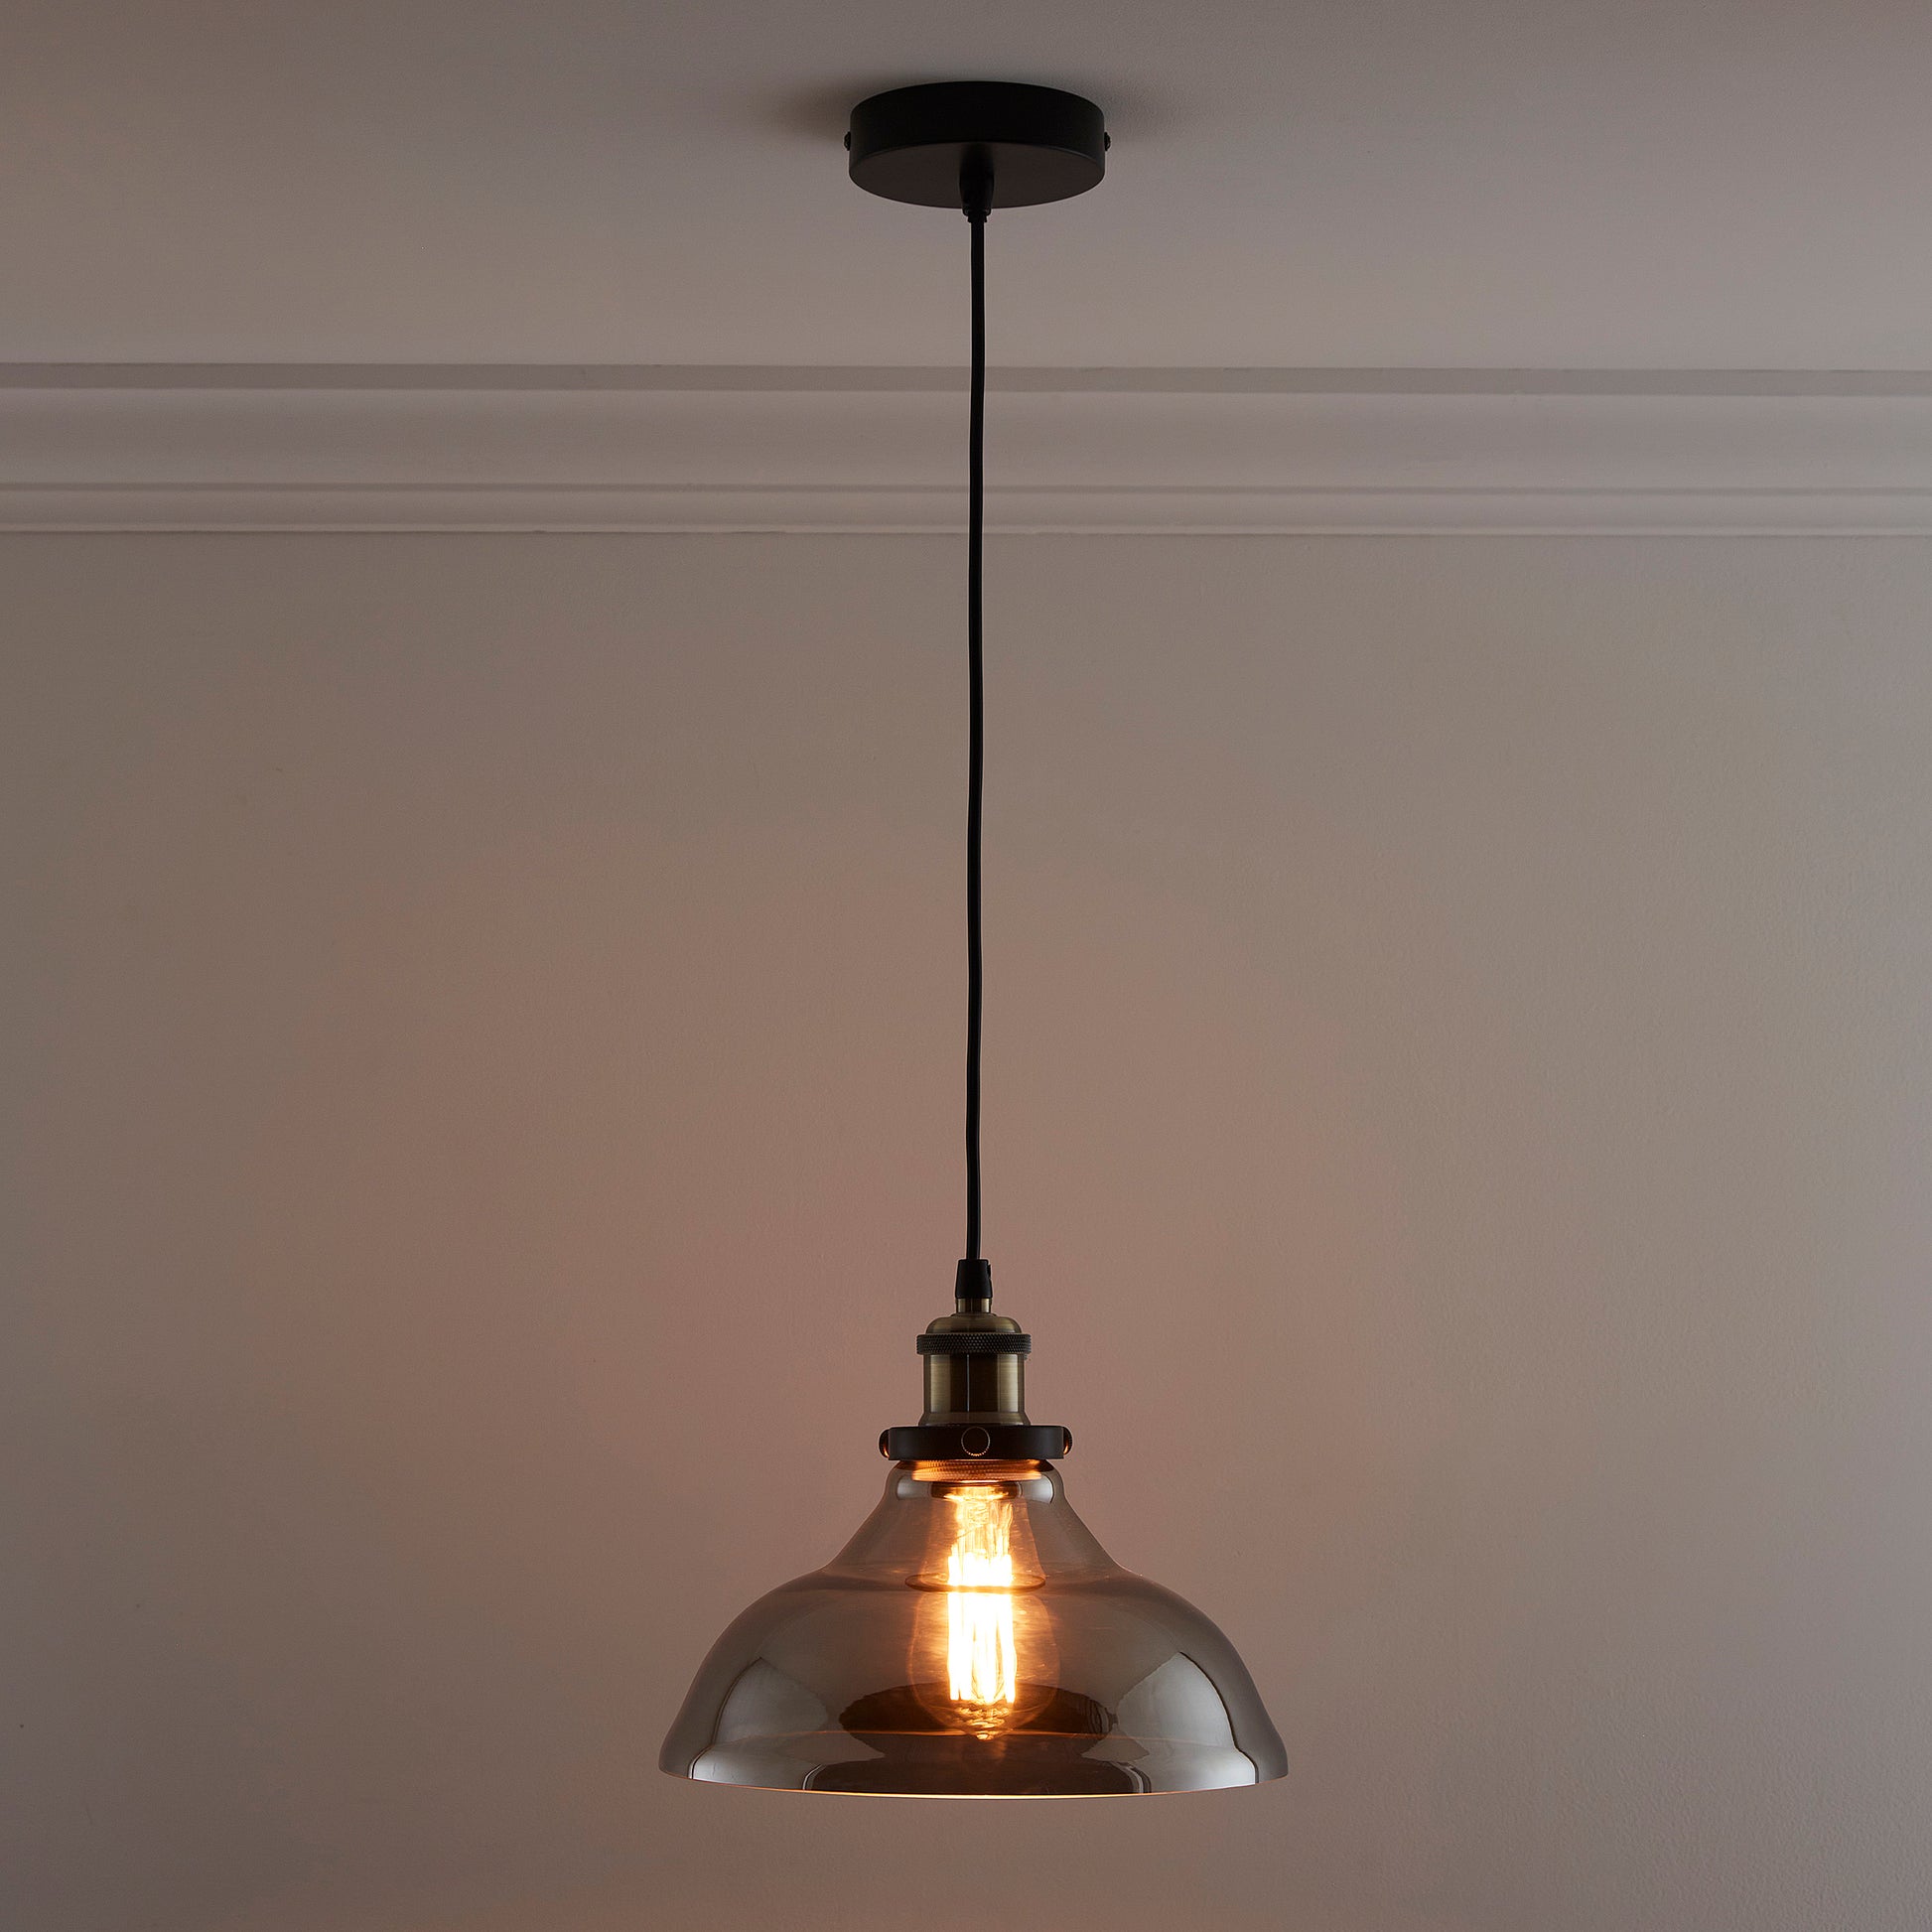 One Light Hanging Glass Ceiling Pendant with Filament Bulb in a Clear or Smokey Colour